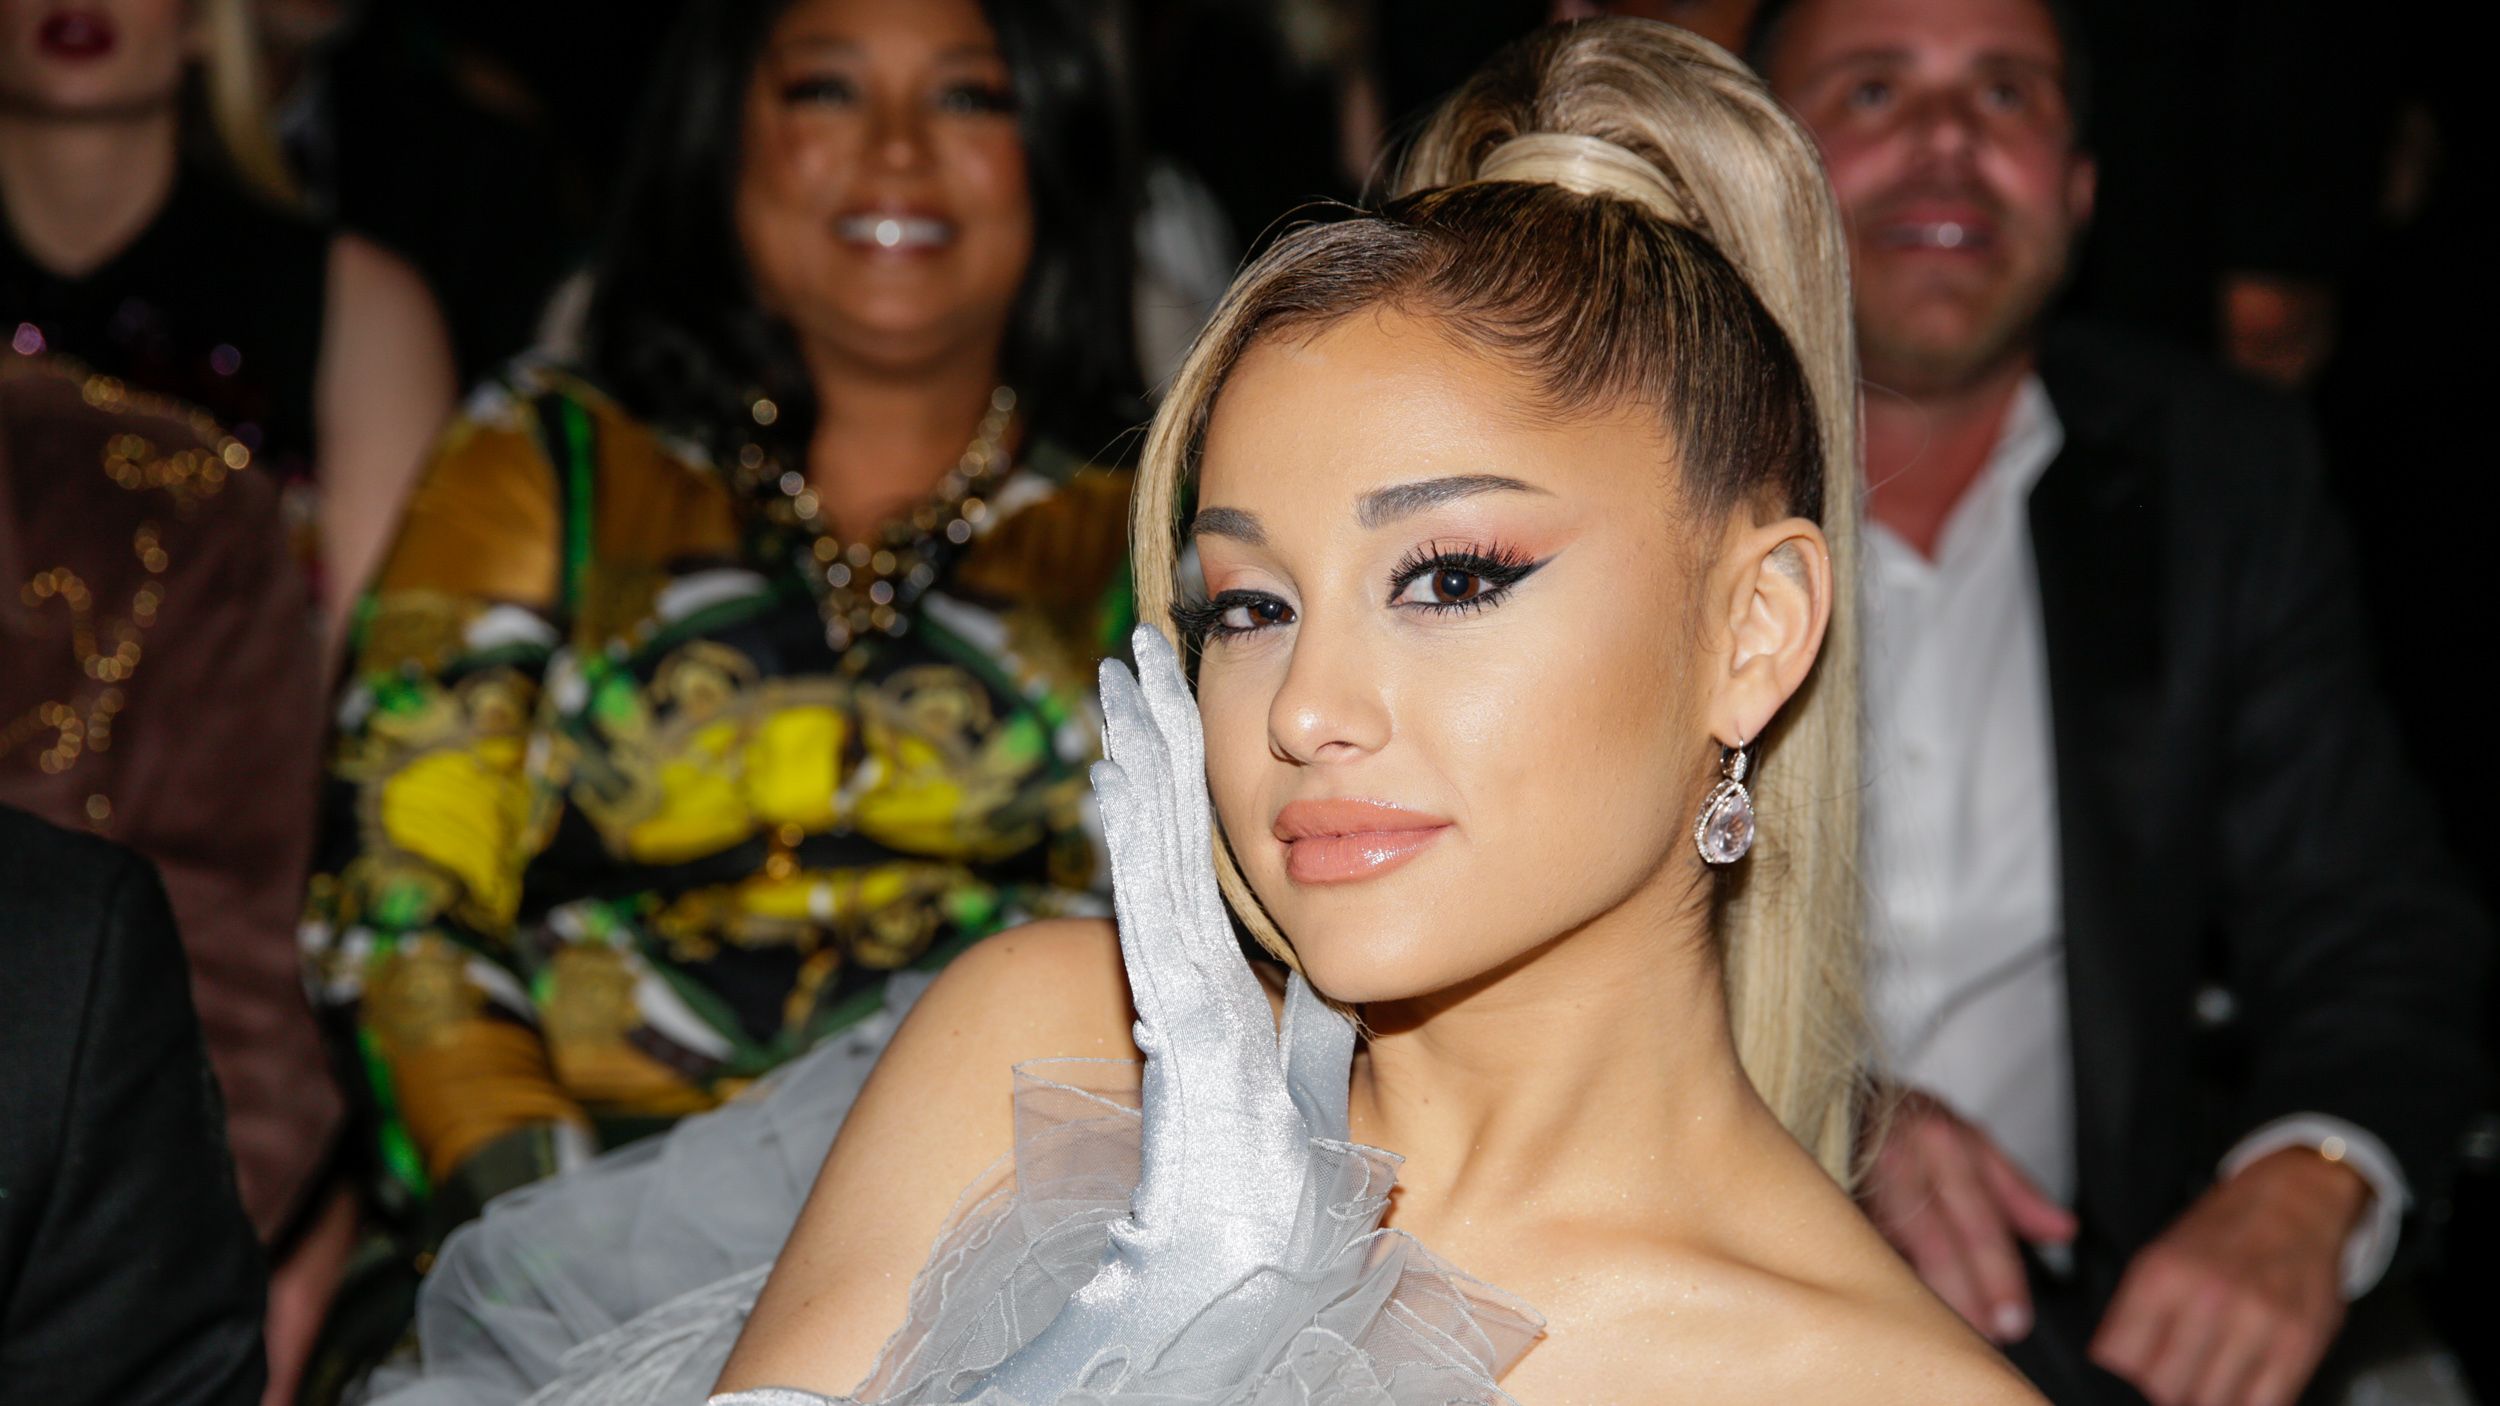 Ariana Grande Channels Glinda the Good Witch With Fairy-Wing